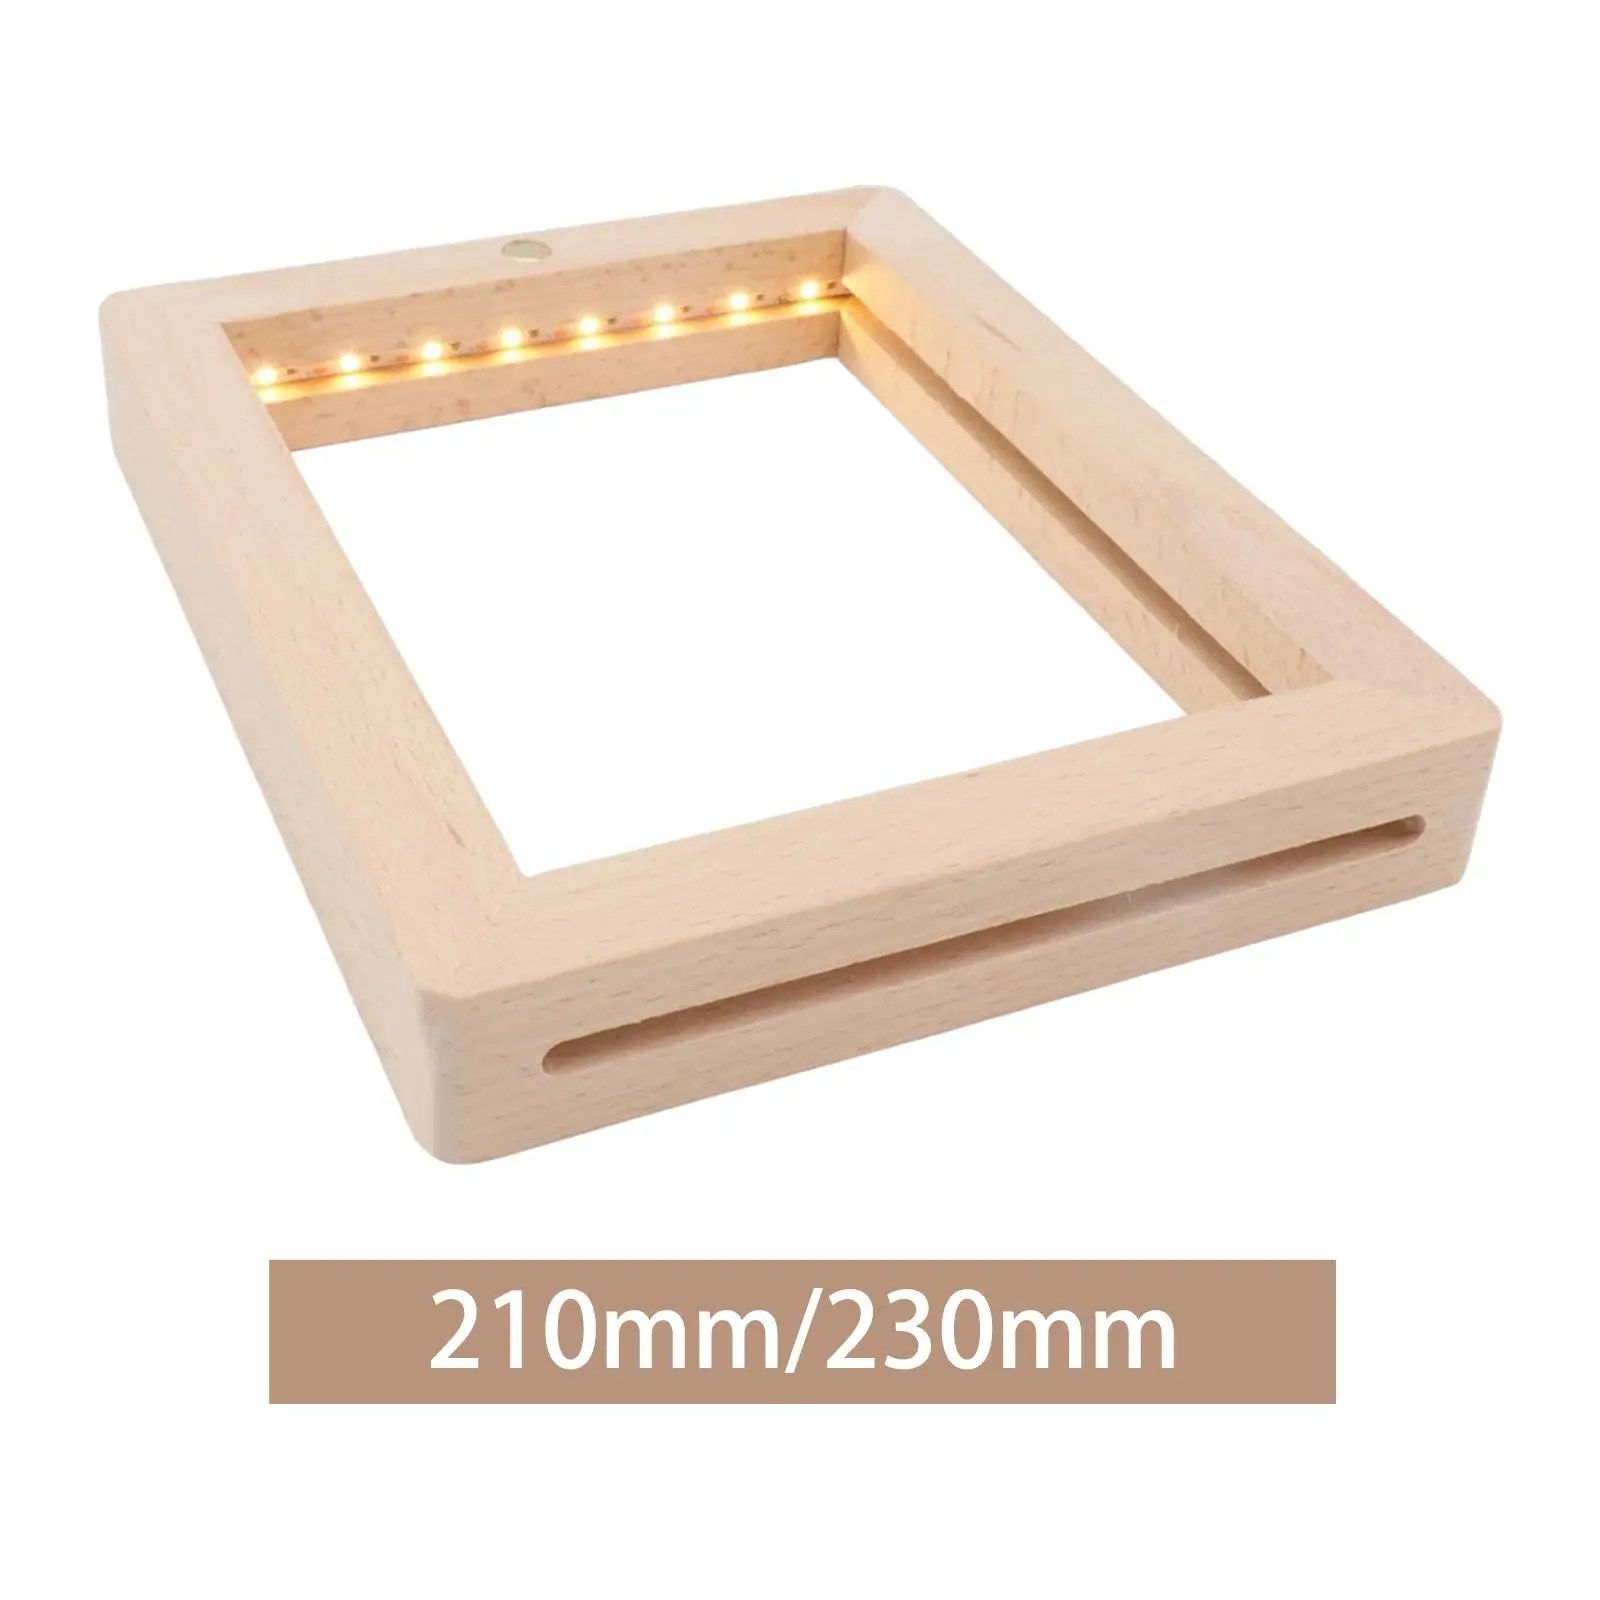 Wood Picture Frame Portable Decoration Display Creative Touch Lamp Night lights led Photo Frame Men Lover Family Children Women